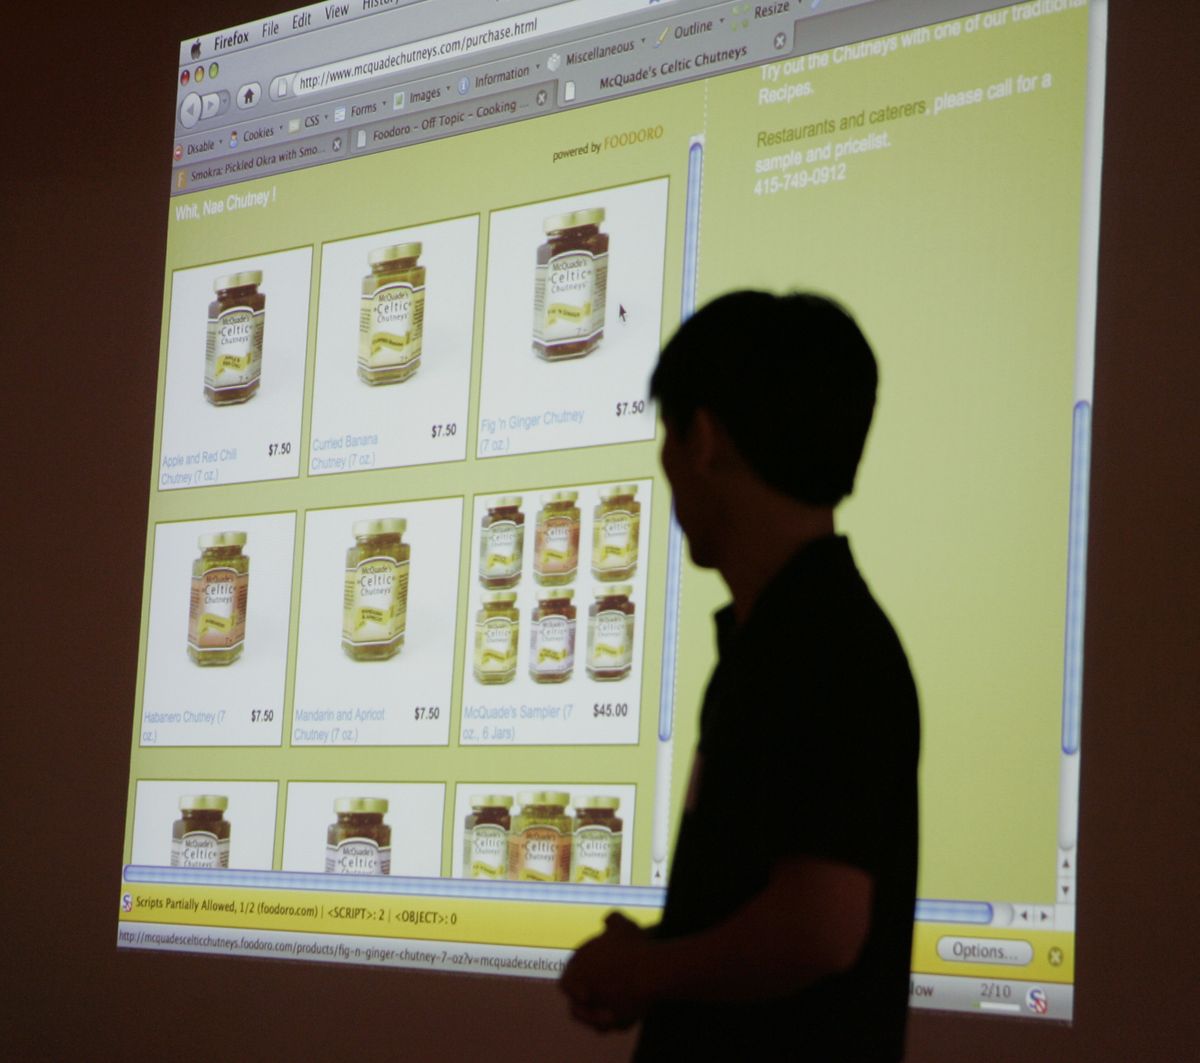 Jay Moon shows off his Web site, Foodoro, at the Demo Day for startups March 18 in Mountain View, Calif. Moon explained the gourmet retail site, which he co-founded, features items from more than 60 producers. Associated Press photos (Associated Press photos / The Spokesman-Review)